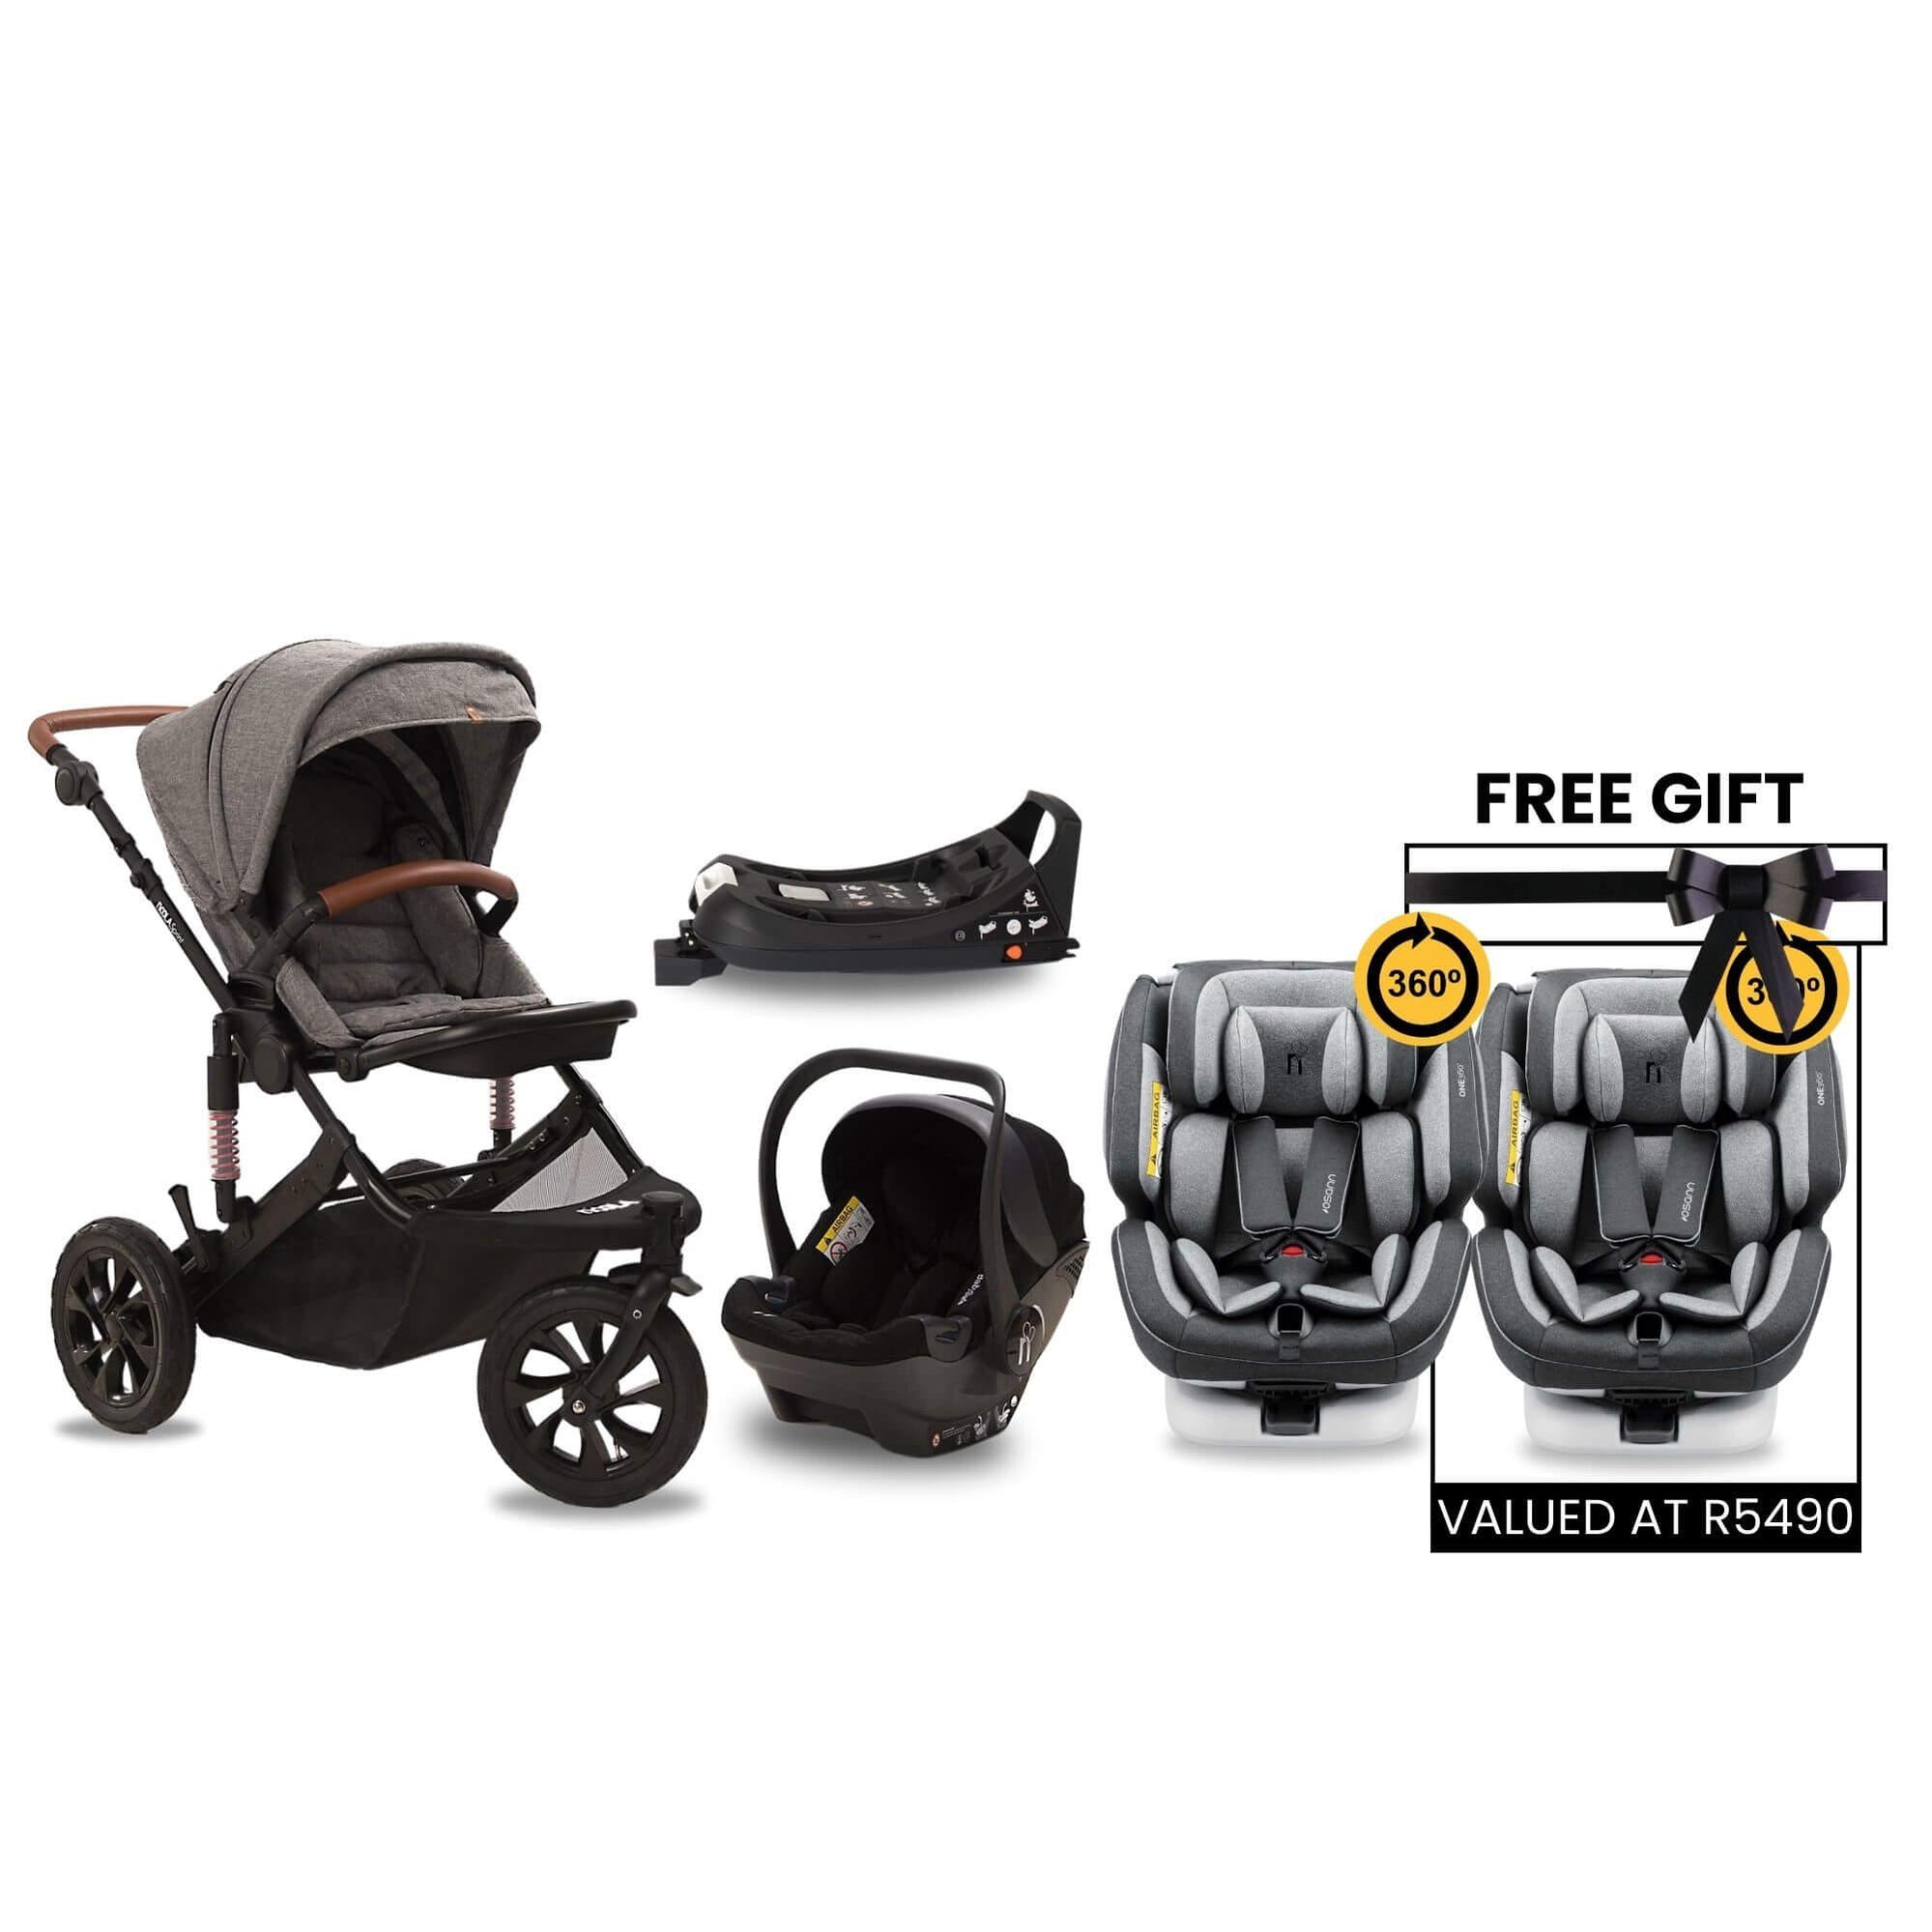 noola sprint 5in1 lunar grey travel system baby stroller #SELECT THE COLOUR OF YOUR ONE360_ONE360 | LUNAR GREY